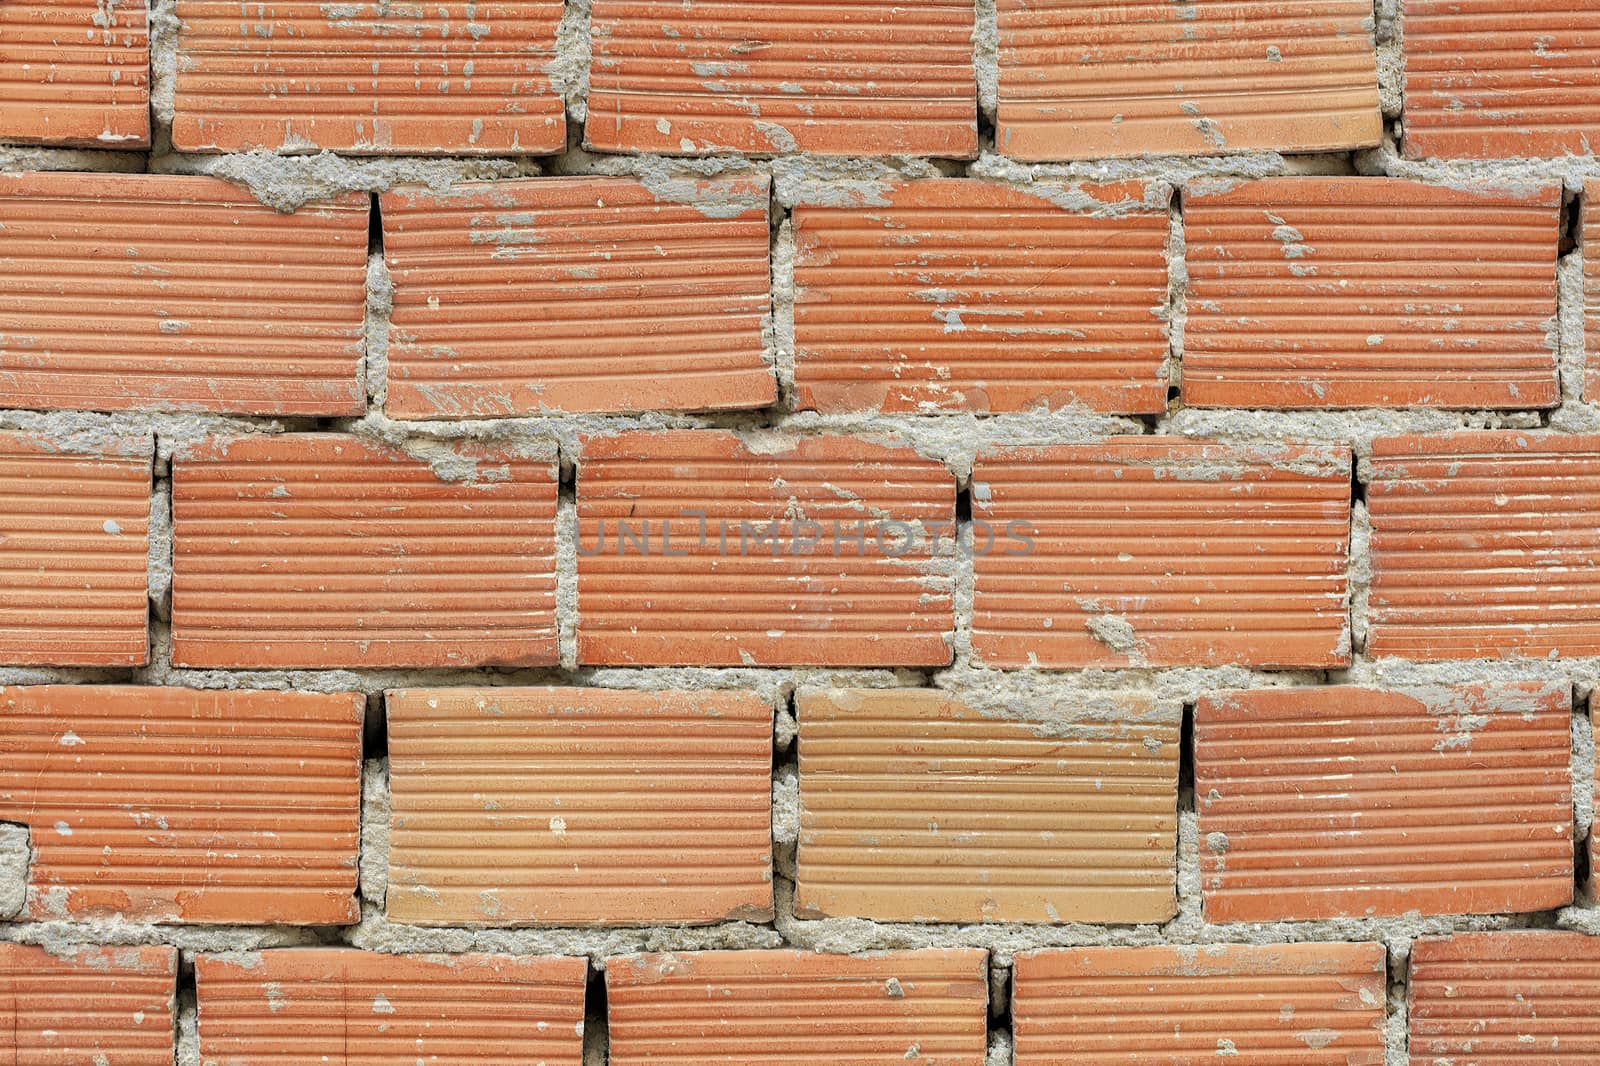 The new corpulent brick wall has an orange color and a horizontal texture with a cement seam.